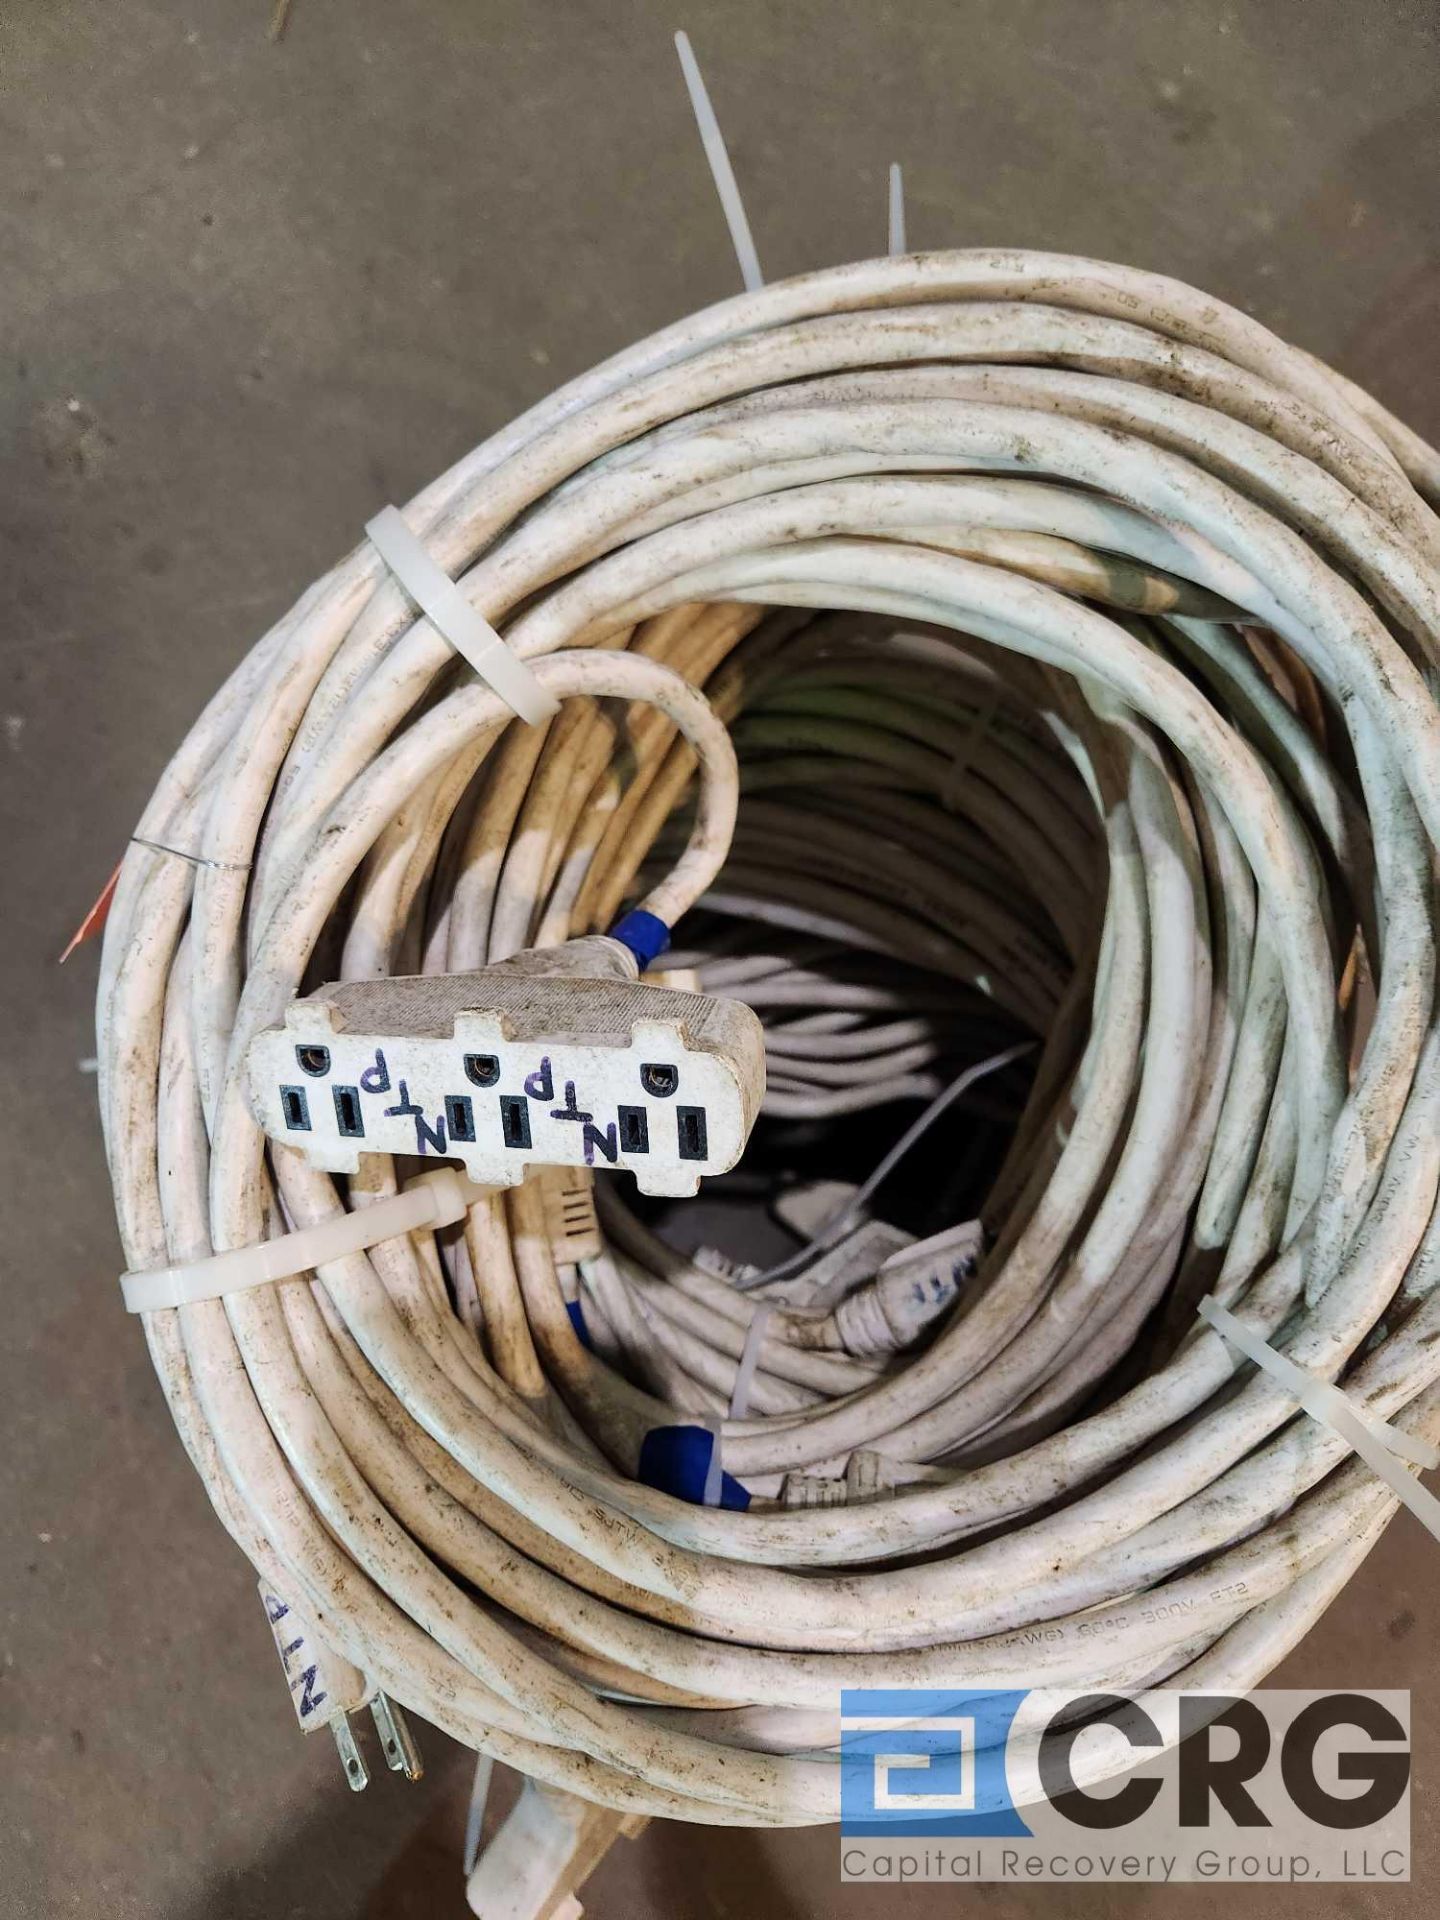 50' Long 12 Gauge White Extension Cords w/Triple Tap Outlet - Image 2 of 2